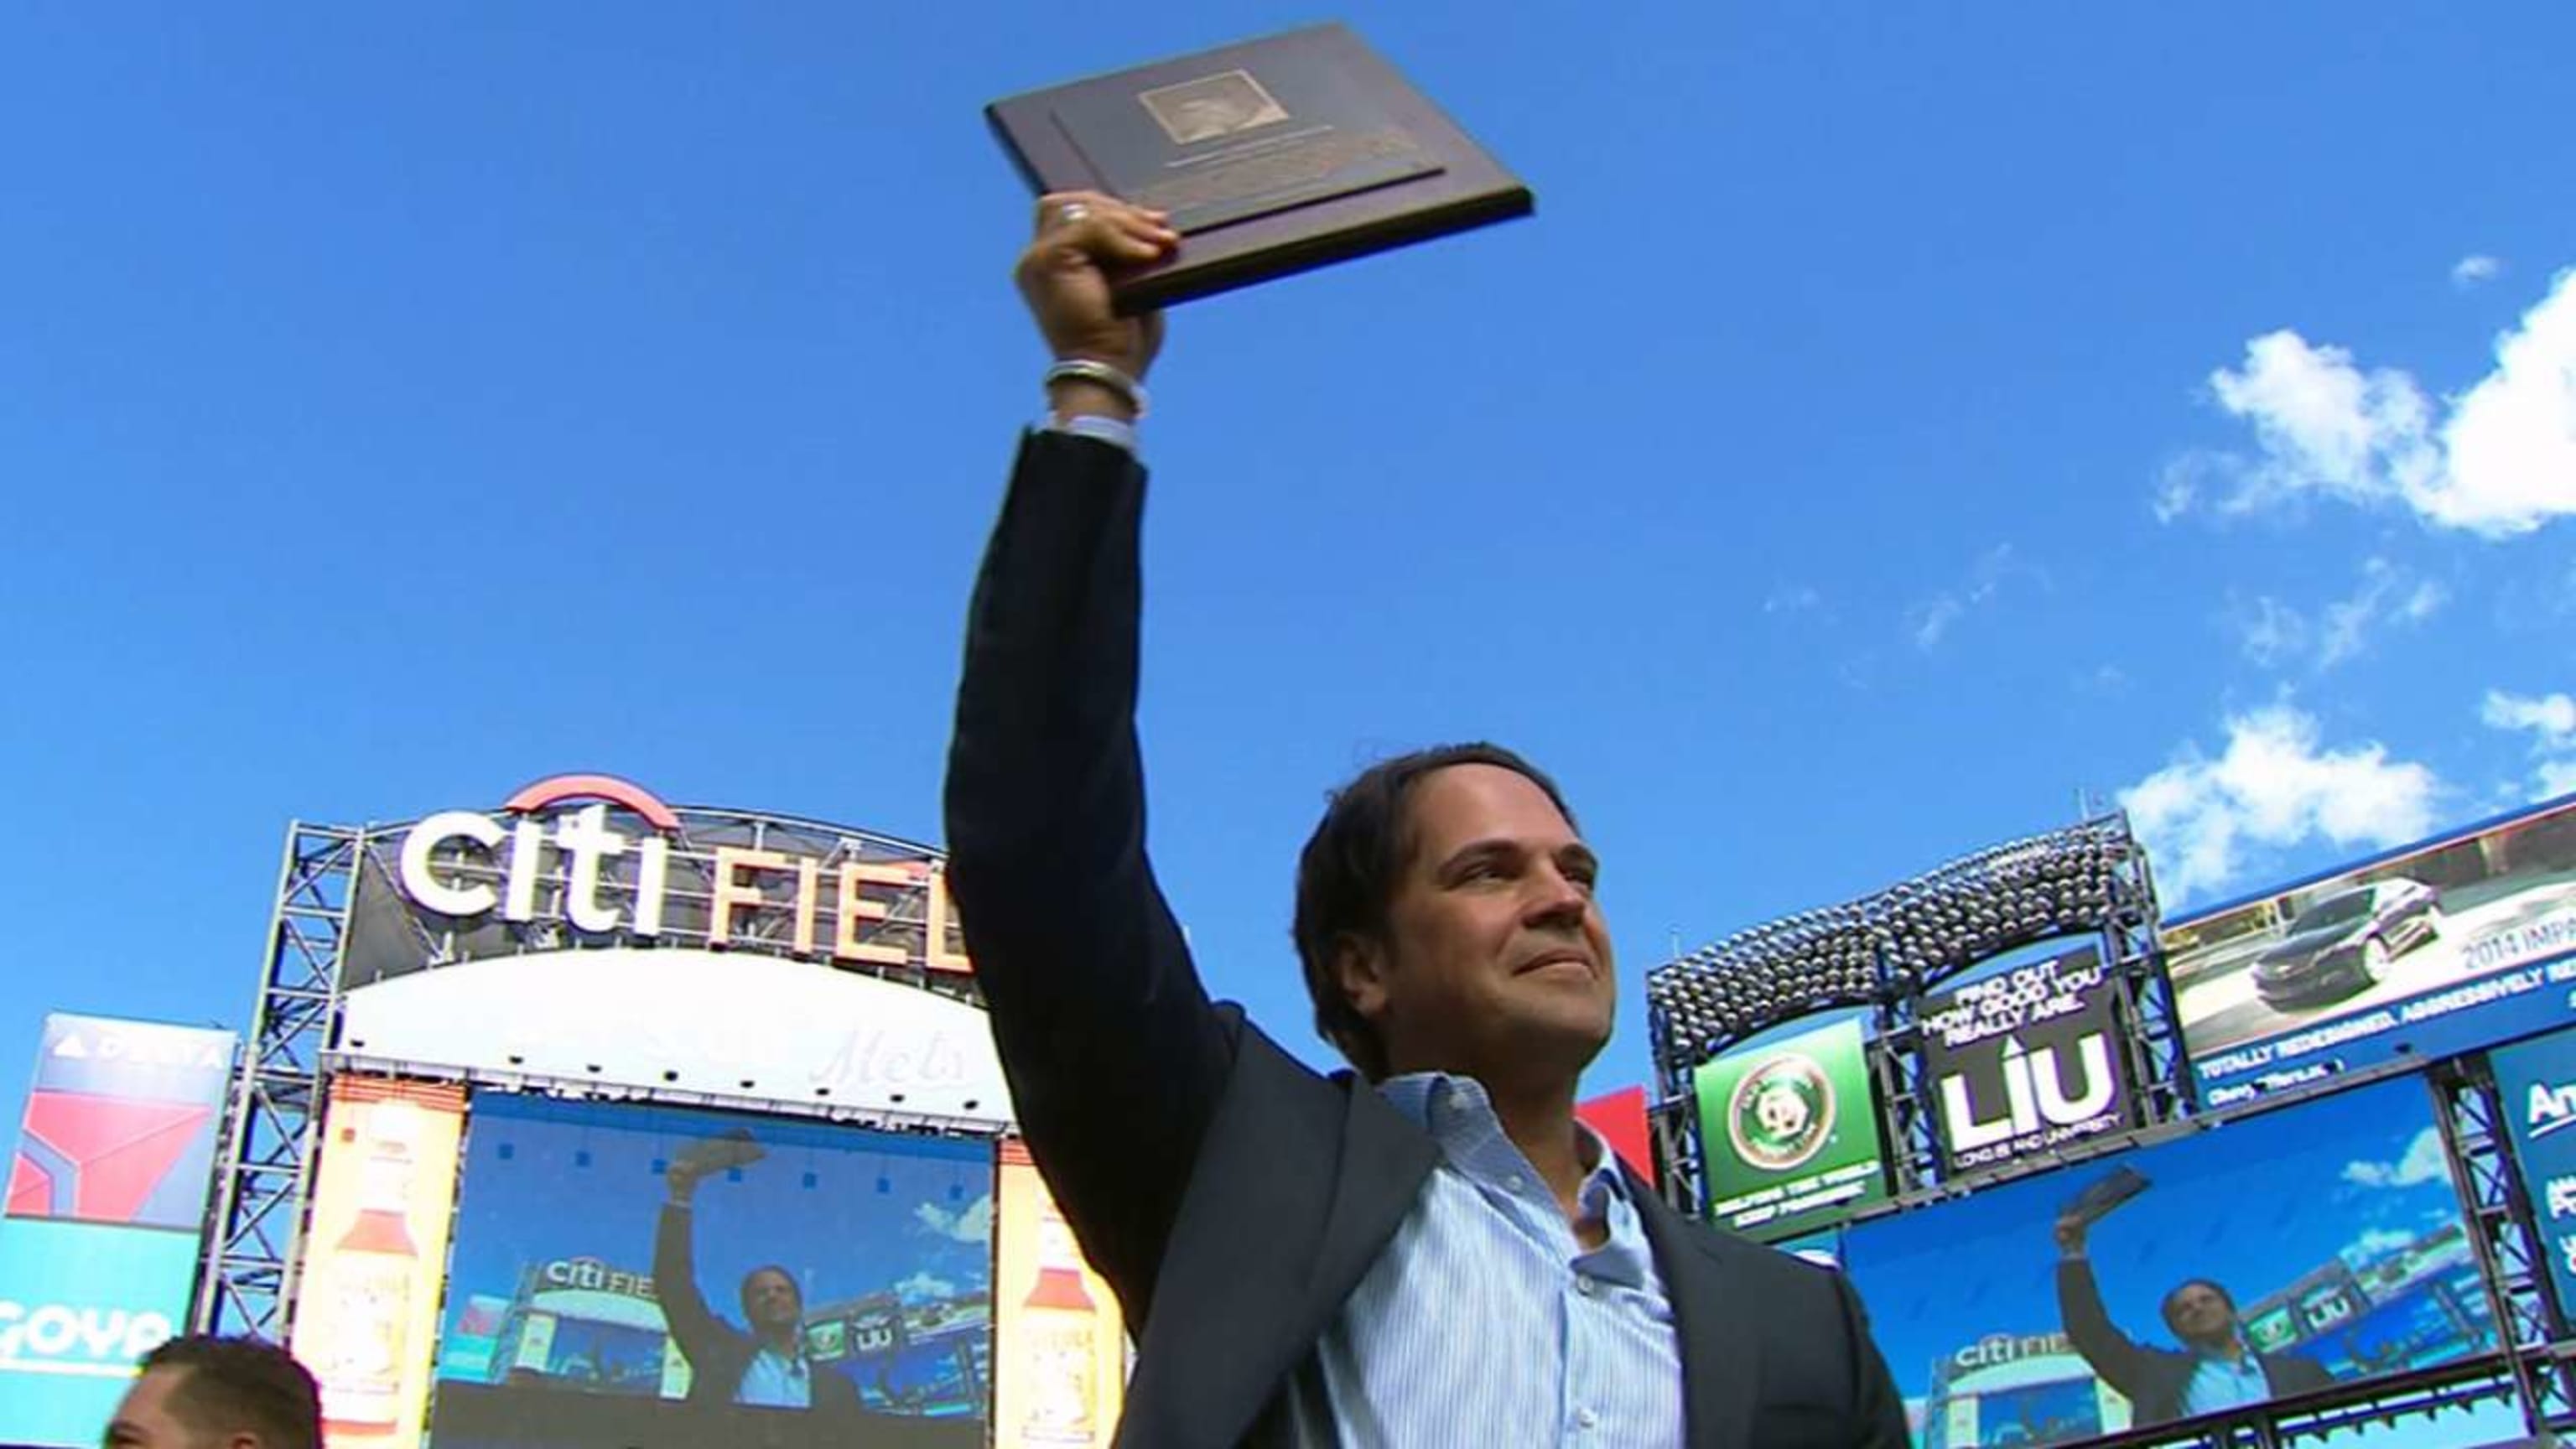 Mets to retire Mike Piazza's No. 31 jersey this season – New York Daily News